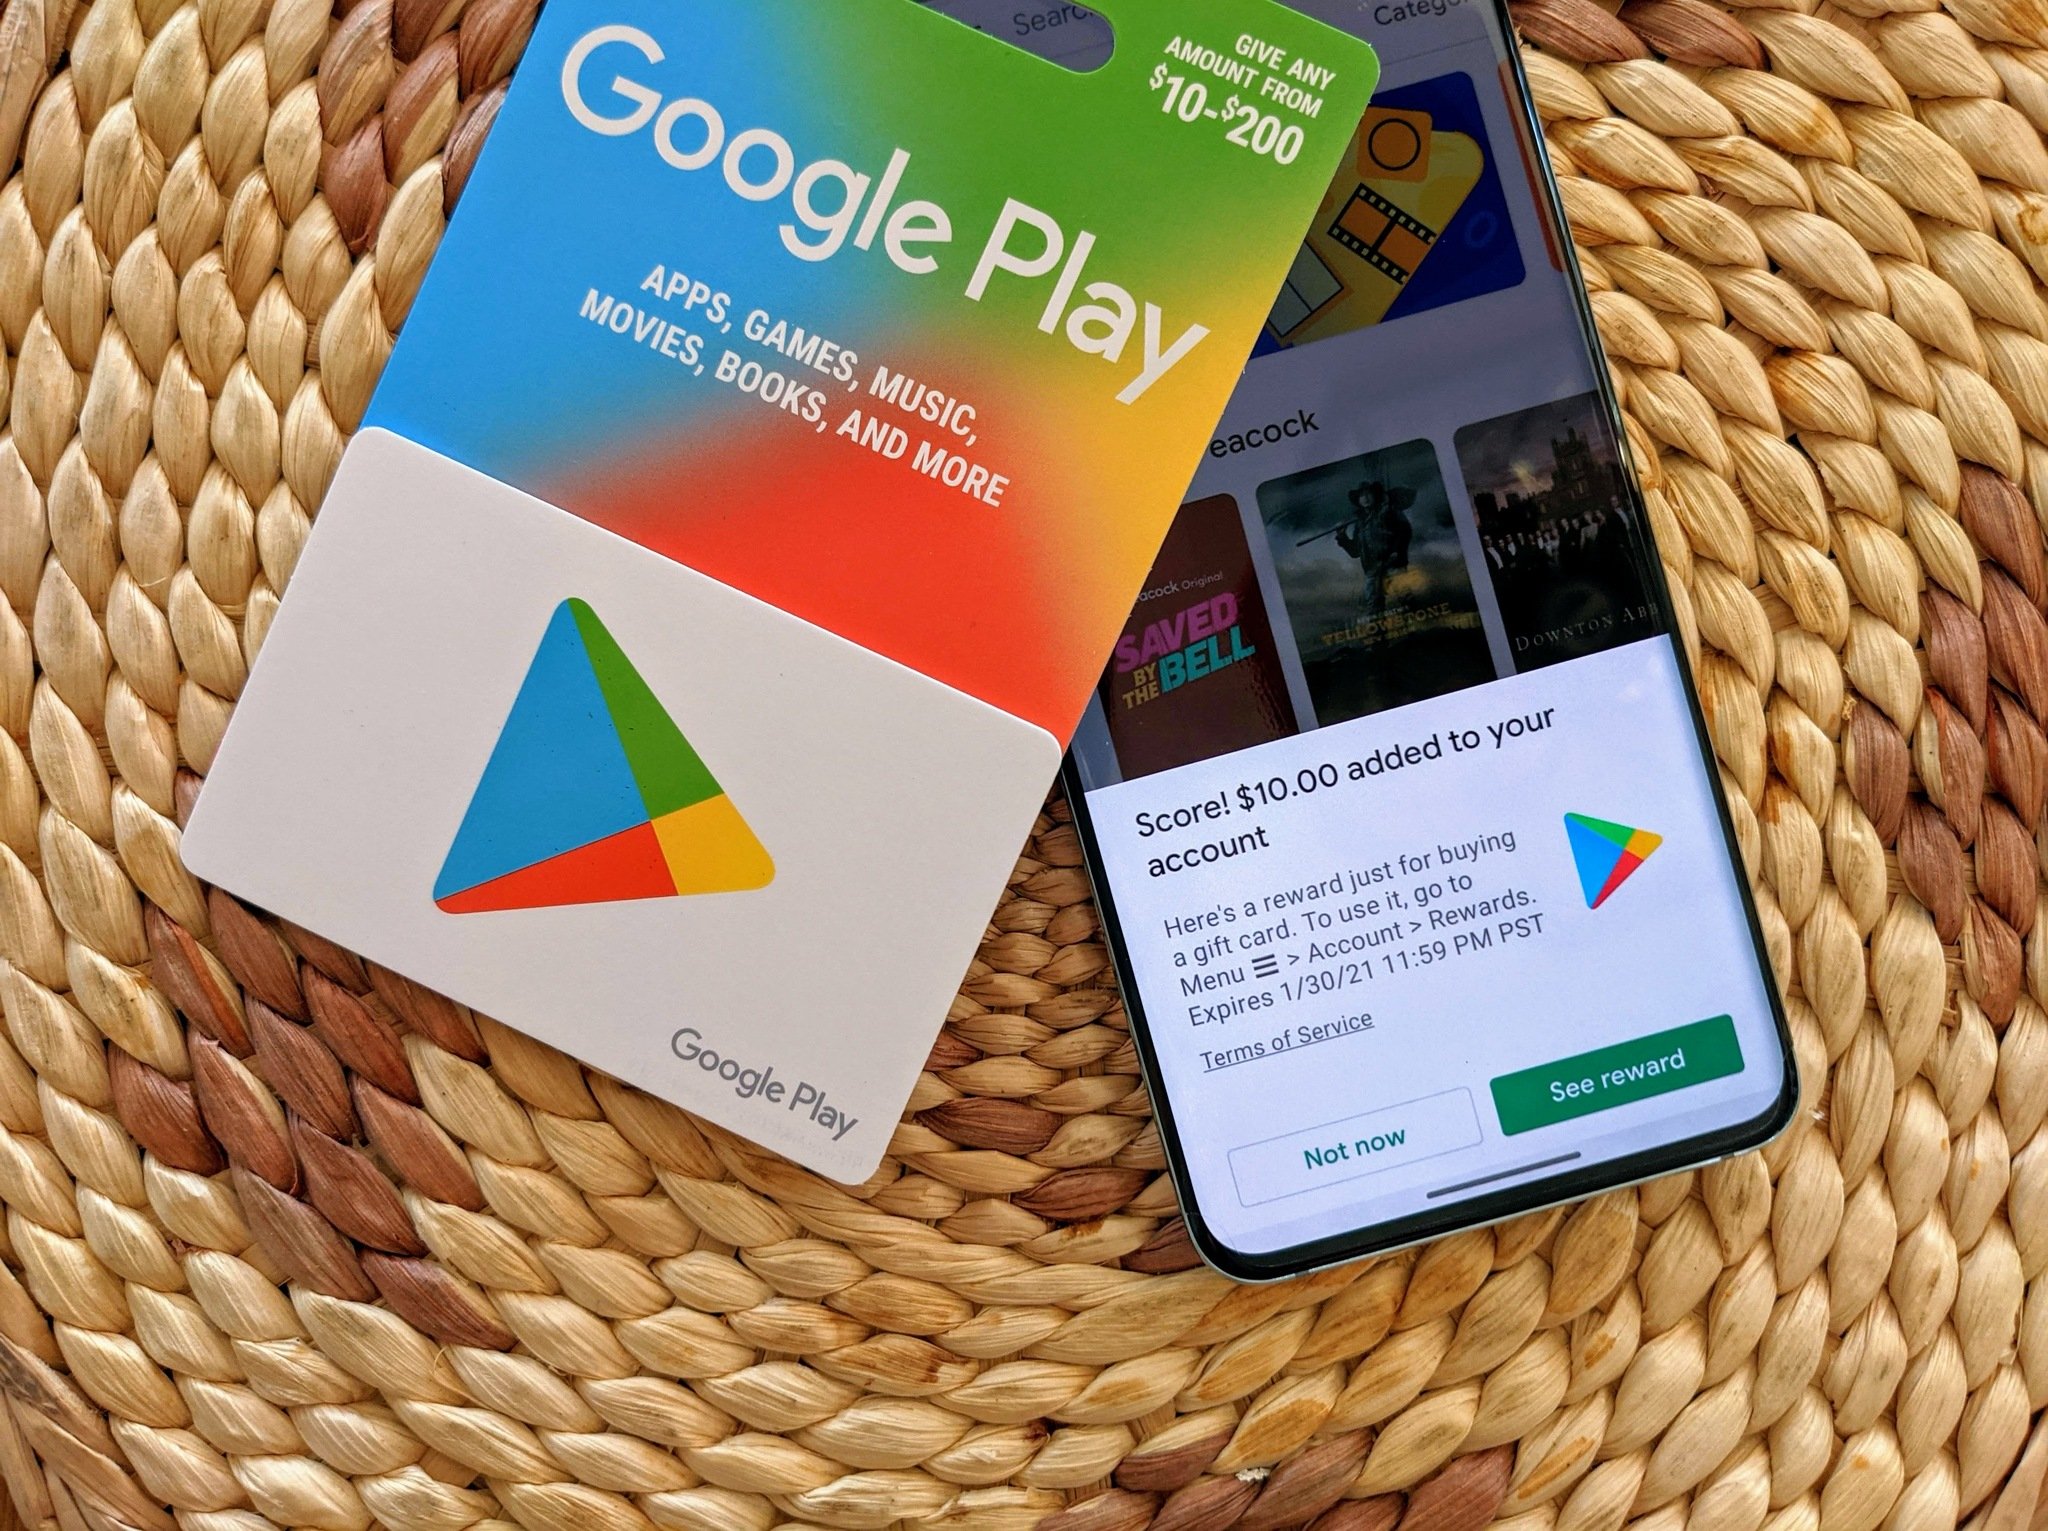 What is a Google Play card used for?